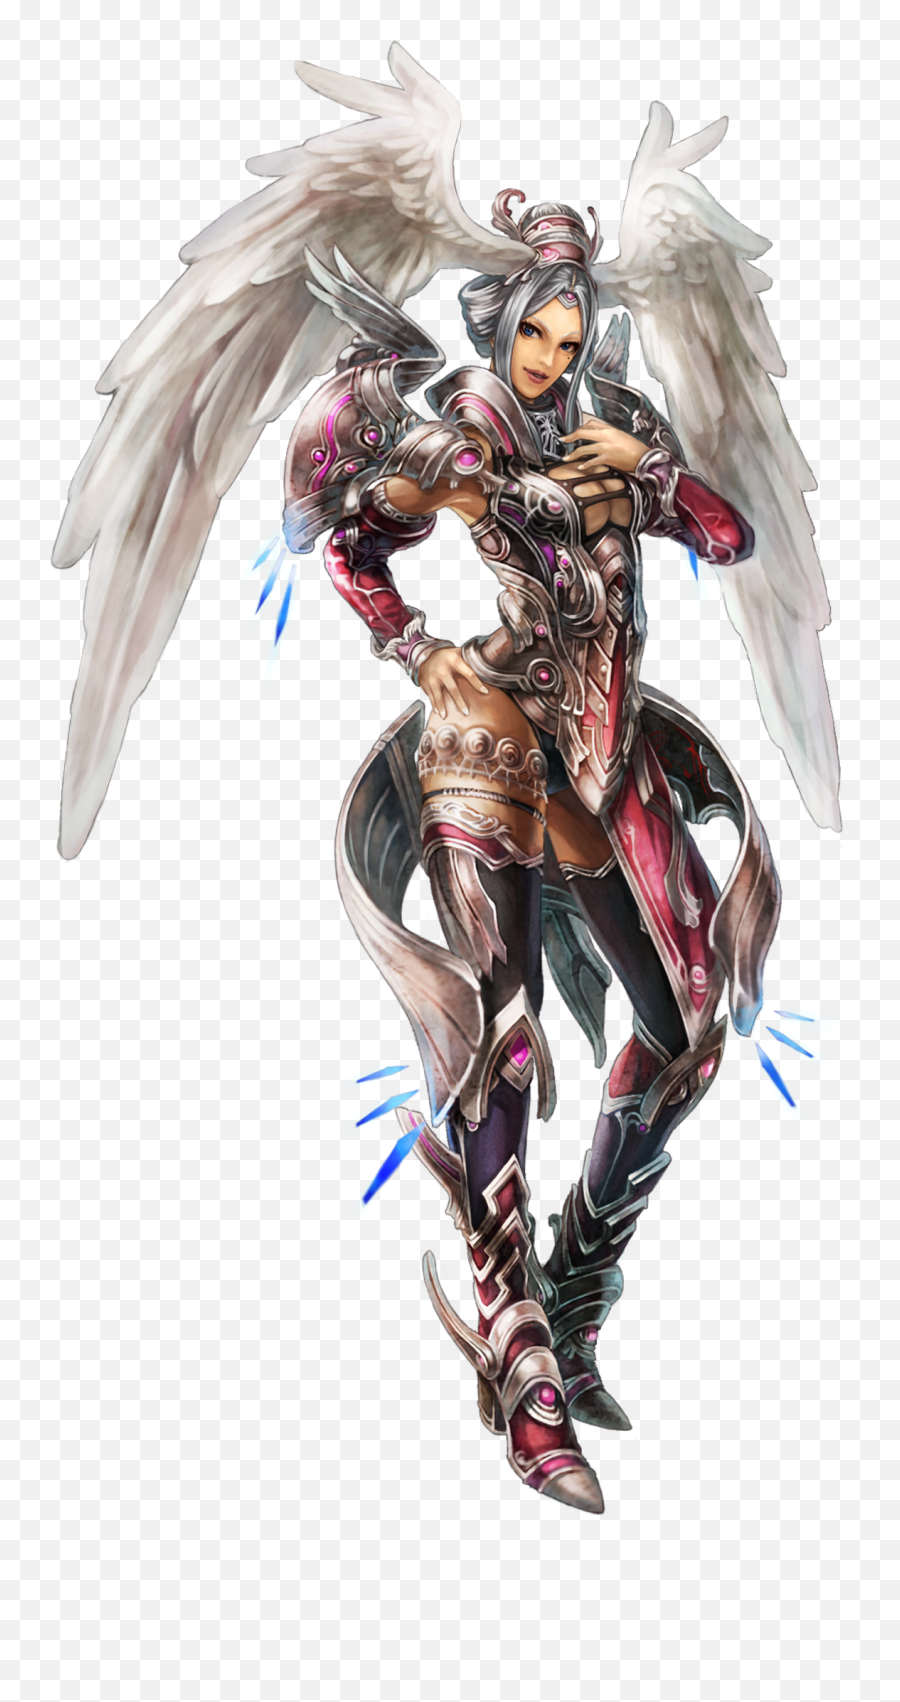 Worst Female Character Design In Gaming Neogaf Emoji,Xenoblade Chronicles X Emotion Connection